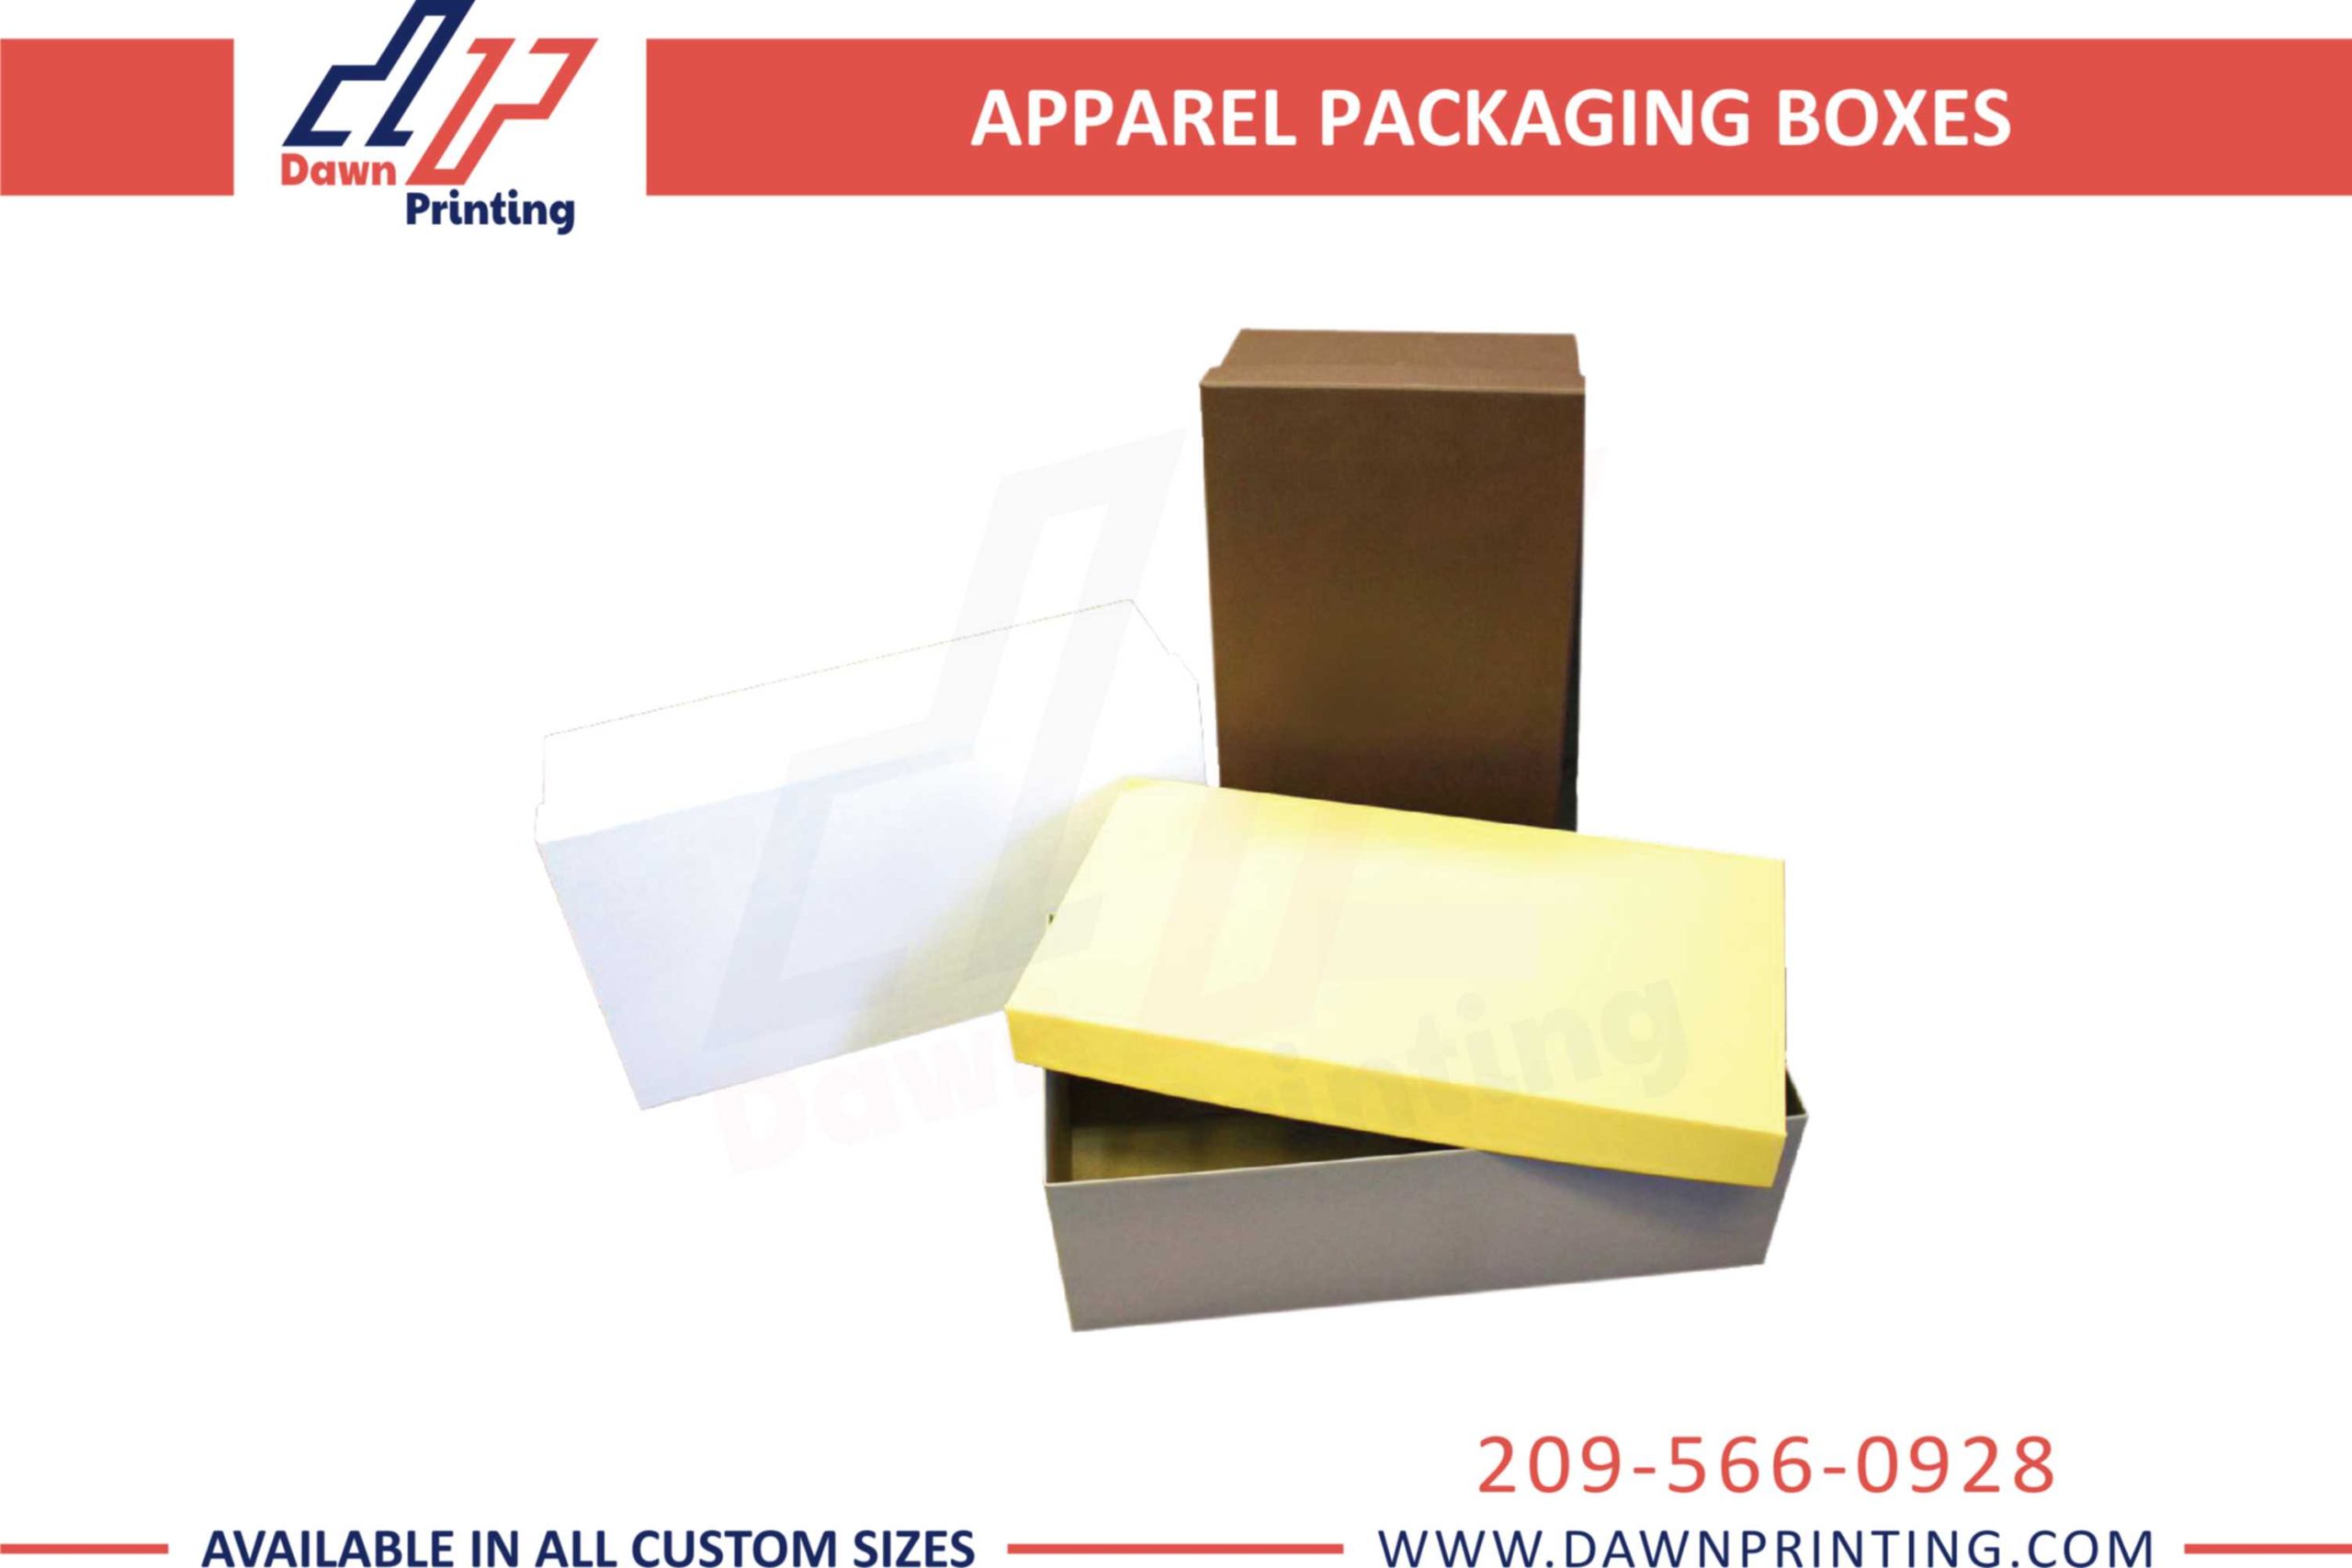 Customized Apparel two Piece Boxes - Dawn Printing